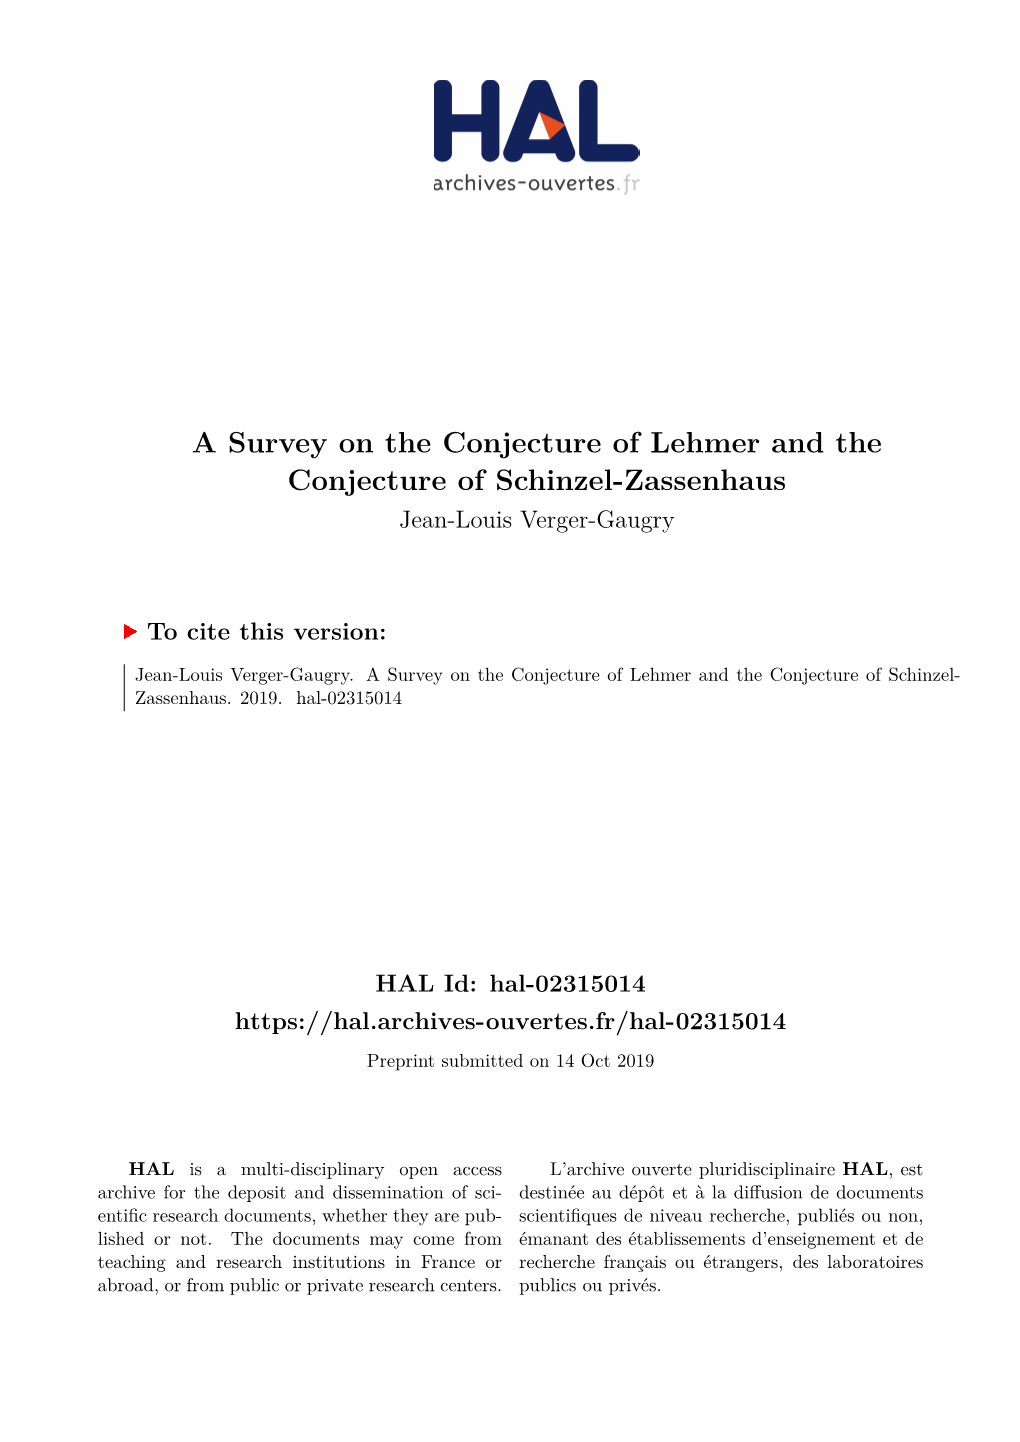 A Survey on the Conjecture of Lehmer and the Conjecture of Schinzel-Zassenhaus Jean-Louis Verger-Gaugry